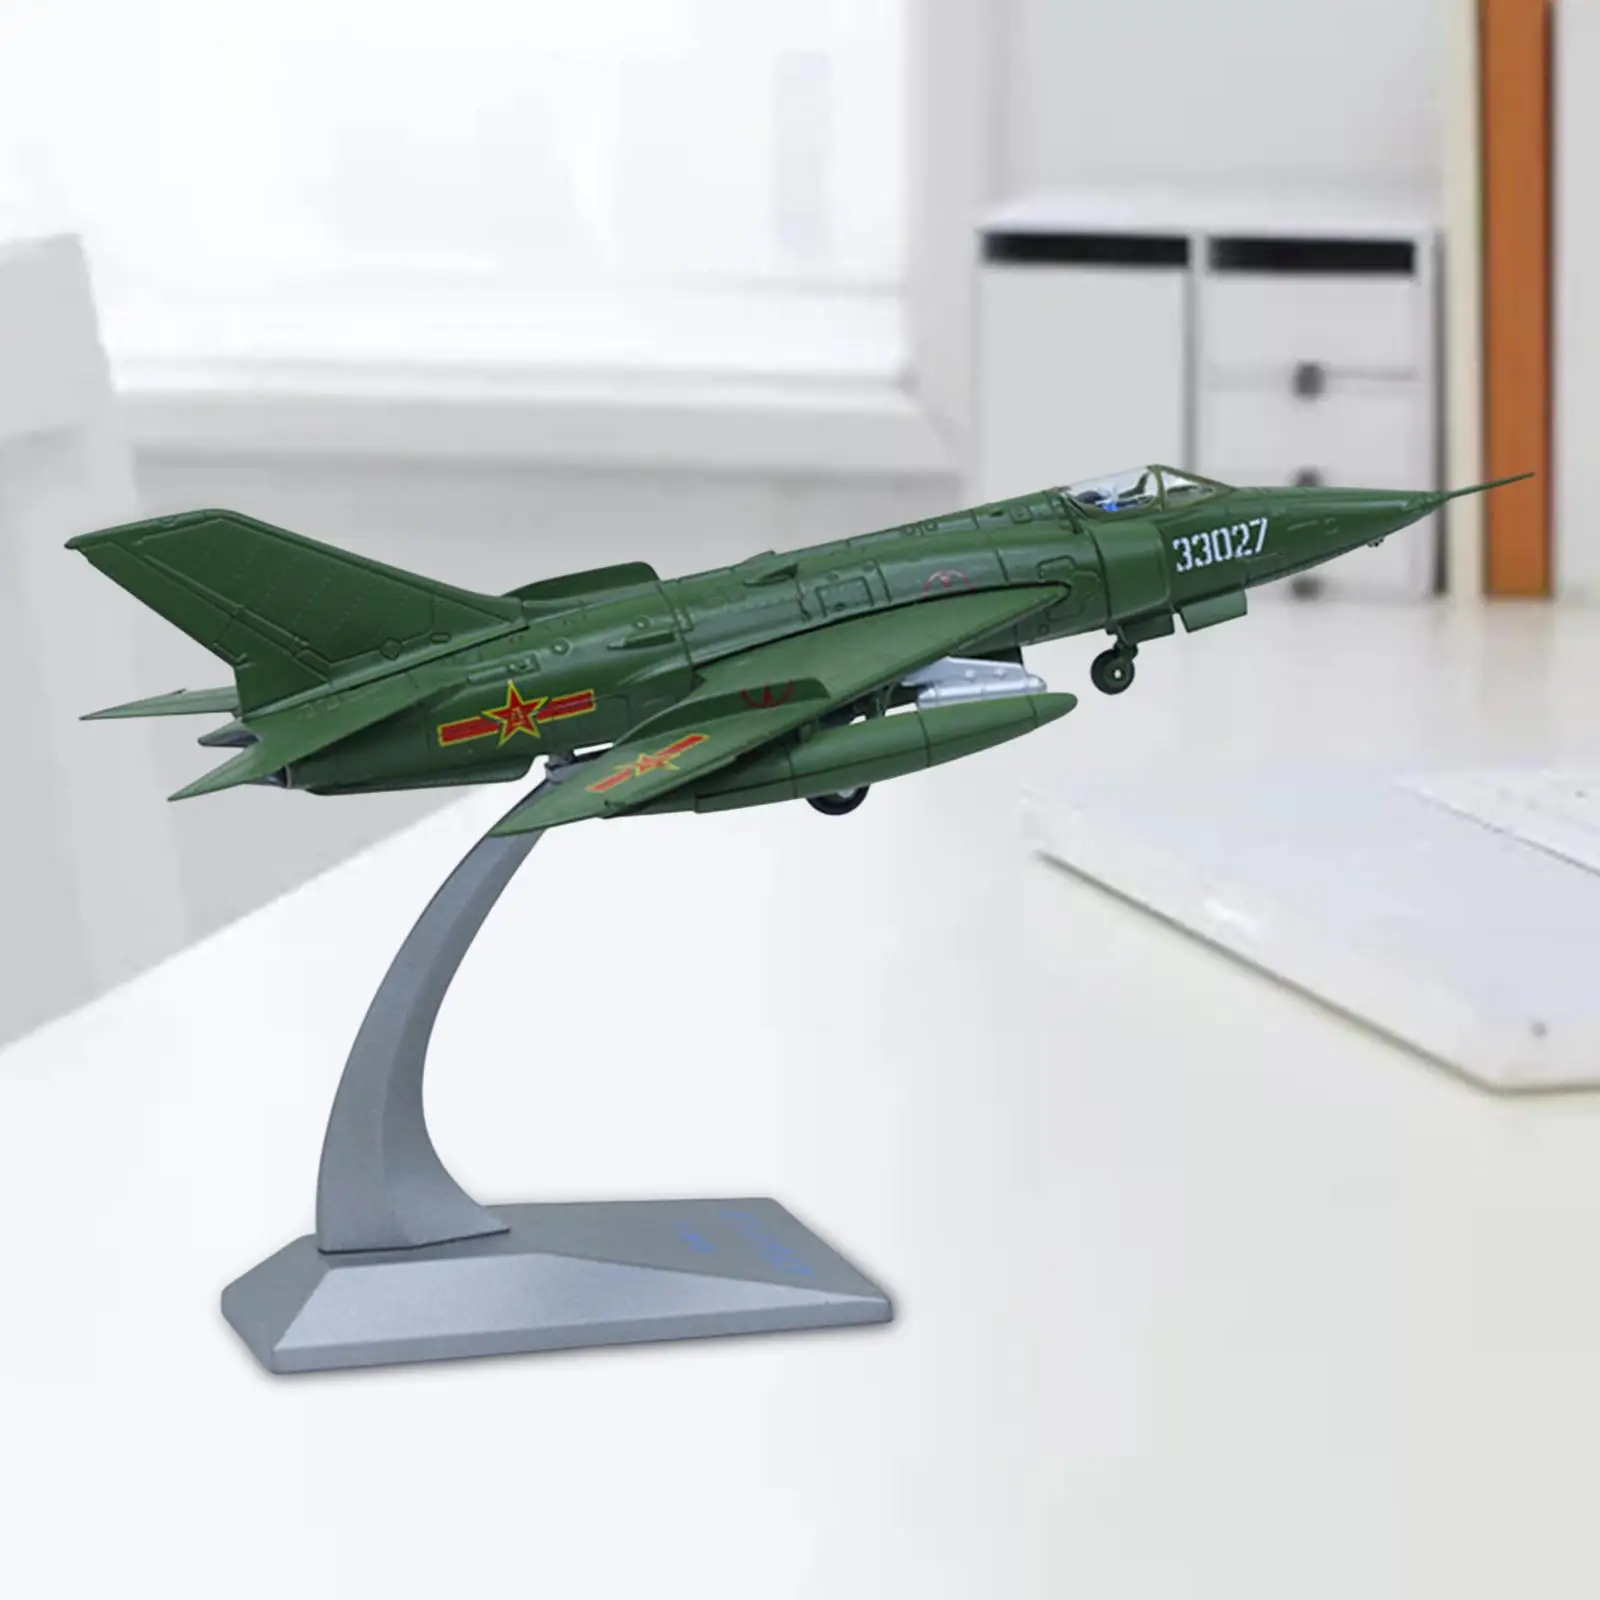 1/72 Scale Model Aircraft Airplane Collectables with Display Stand Plane Tabletop Shelf Ornament